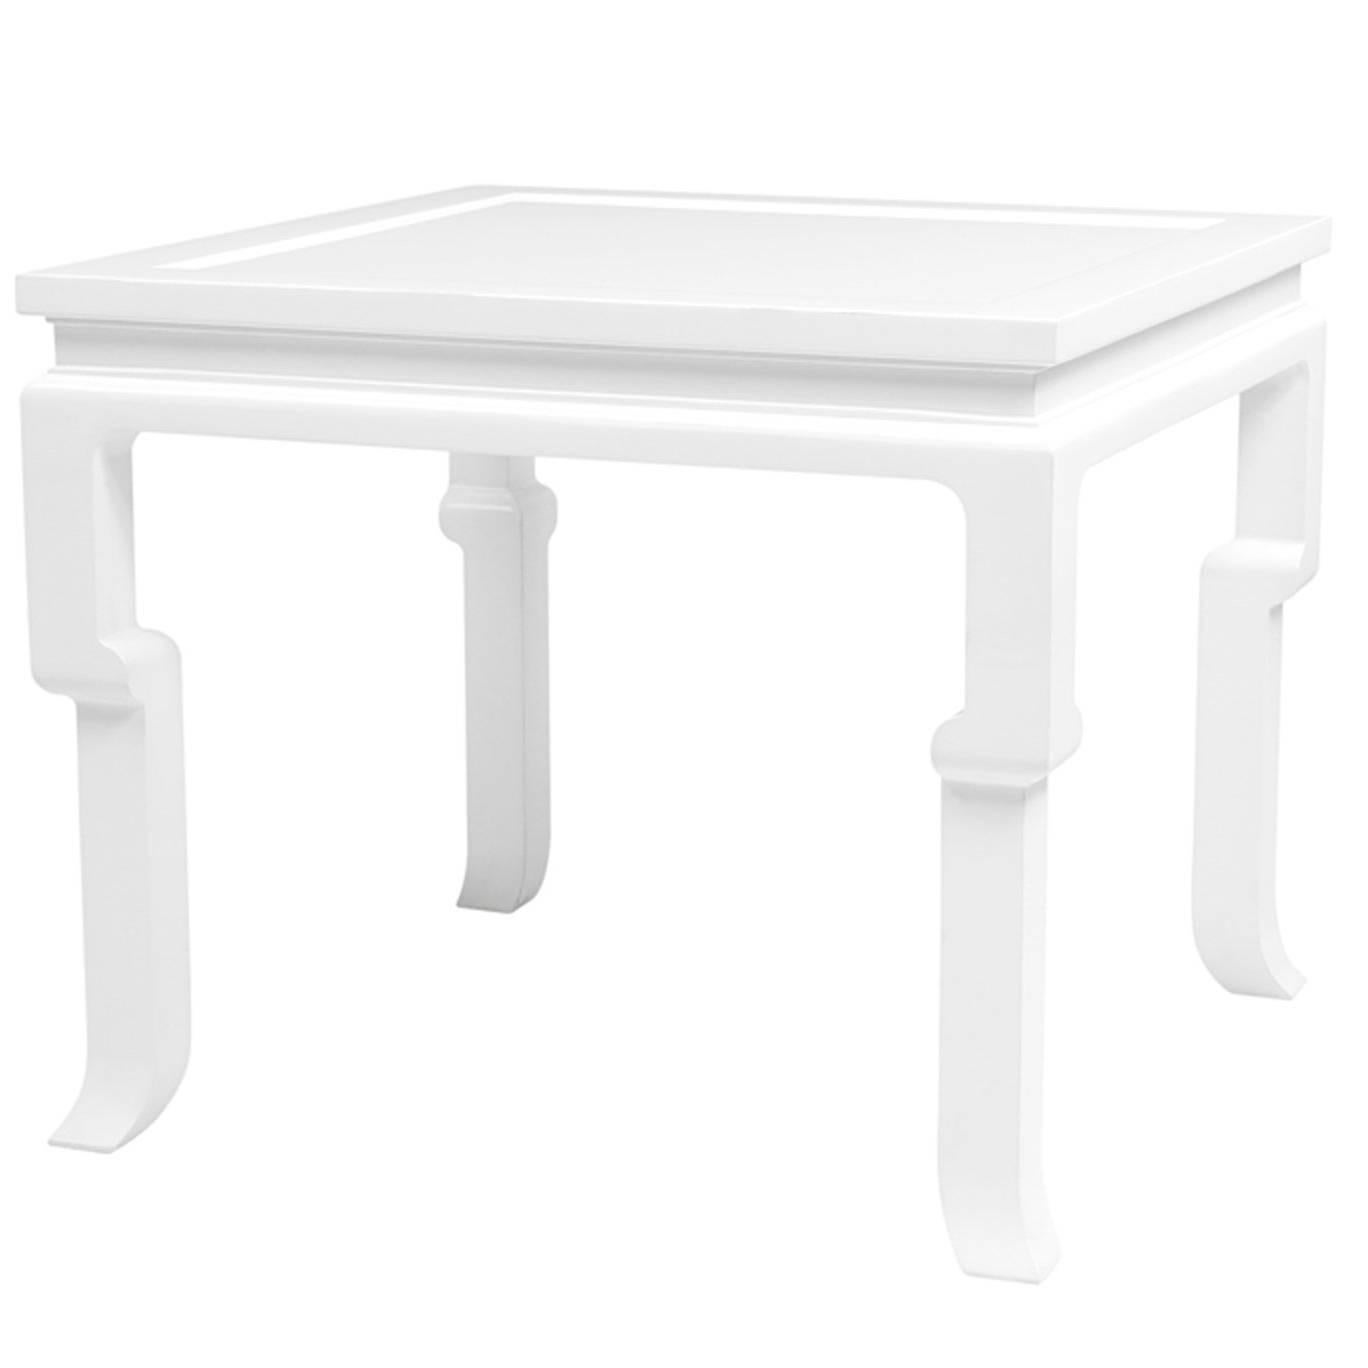 Bengal Side Table in White Lacquered Mahogany Wood